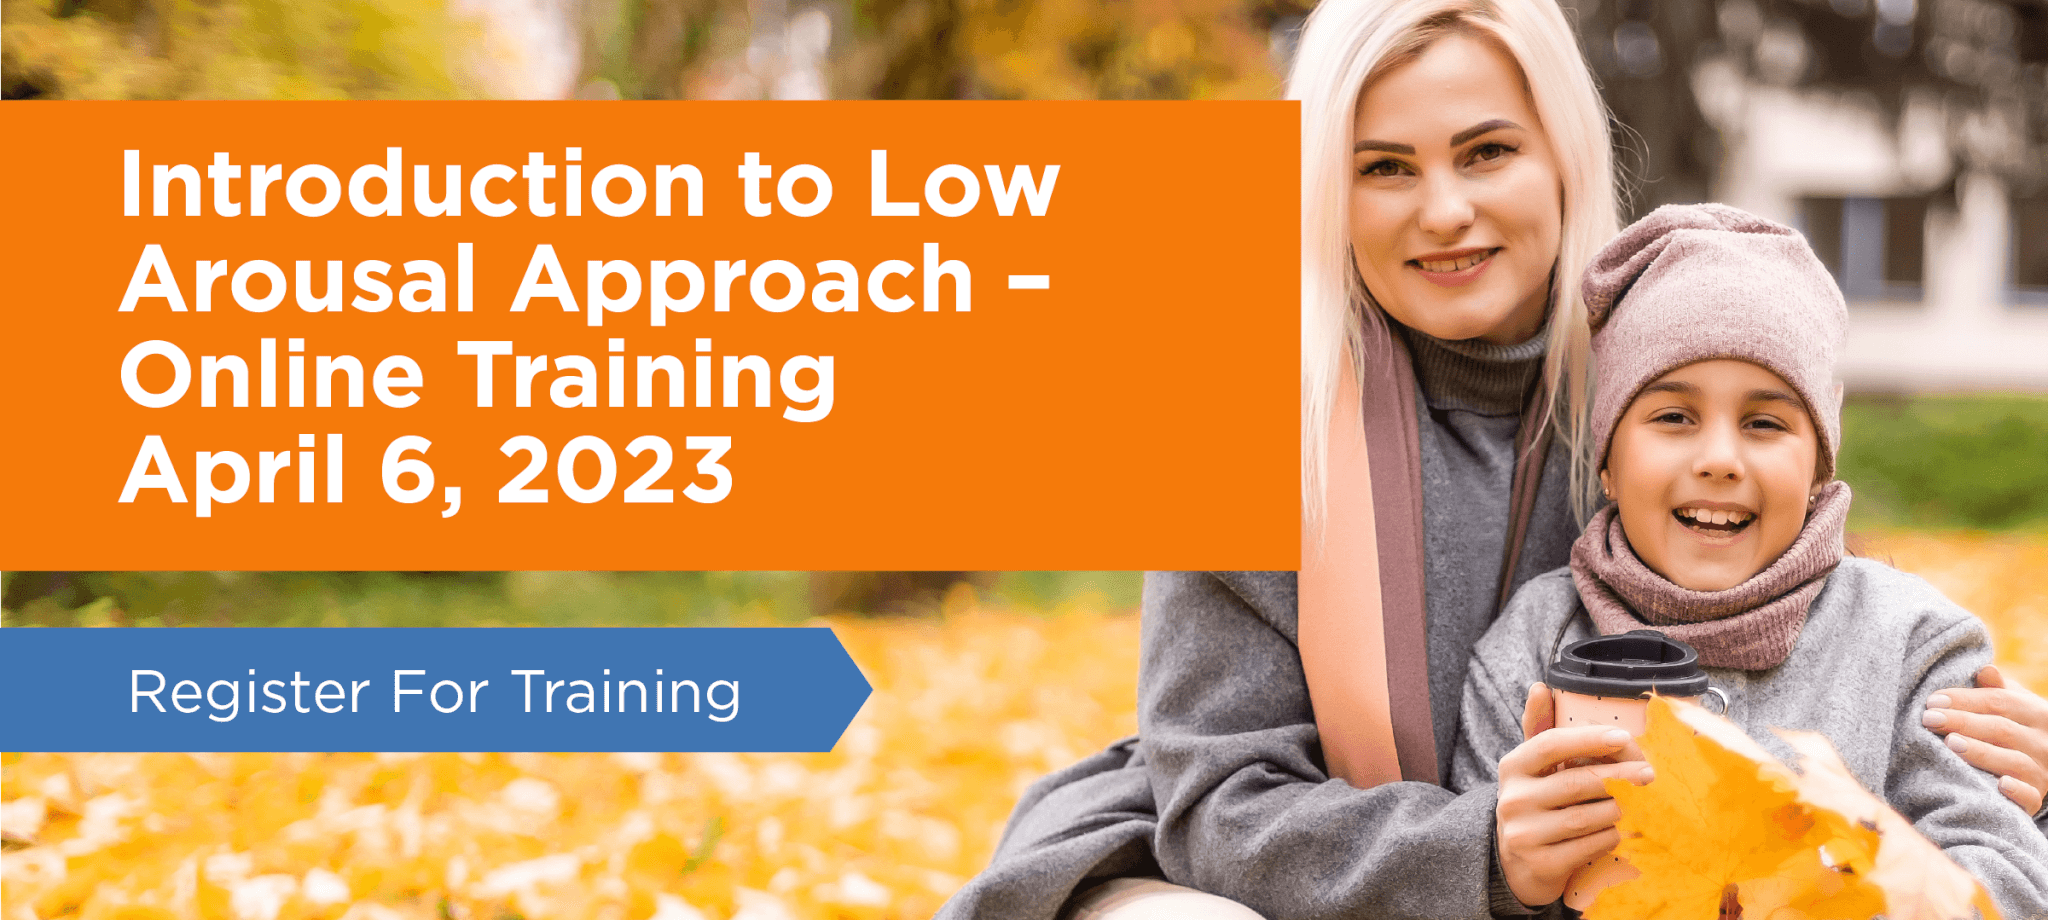 Introduction to the Low Arousal Approach Online Training – April 6, 2023